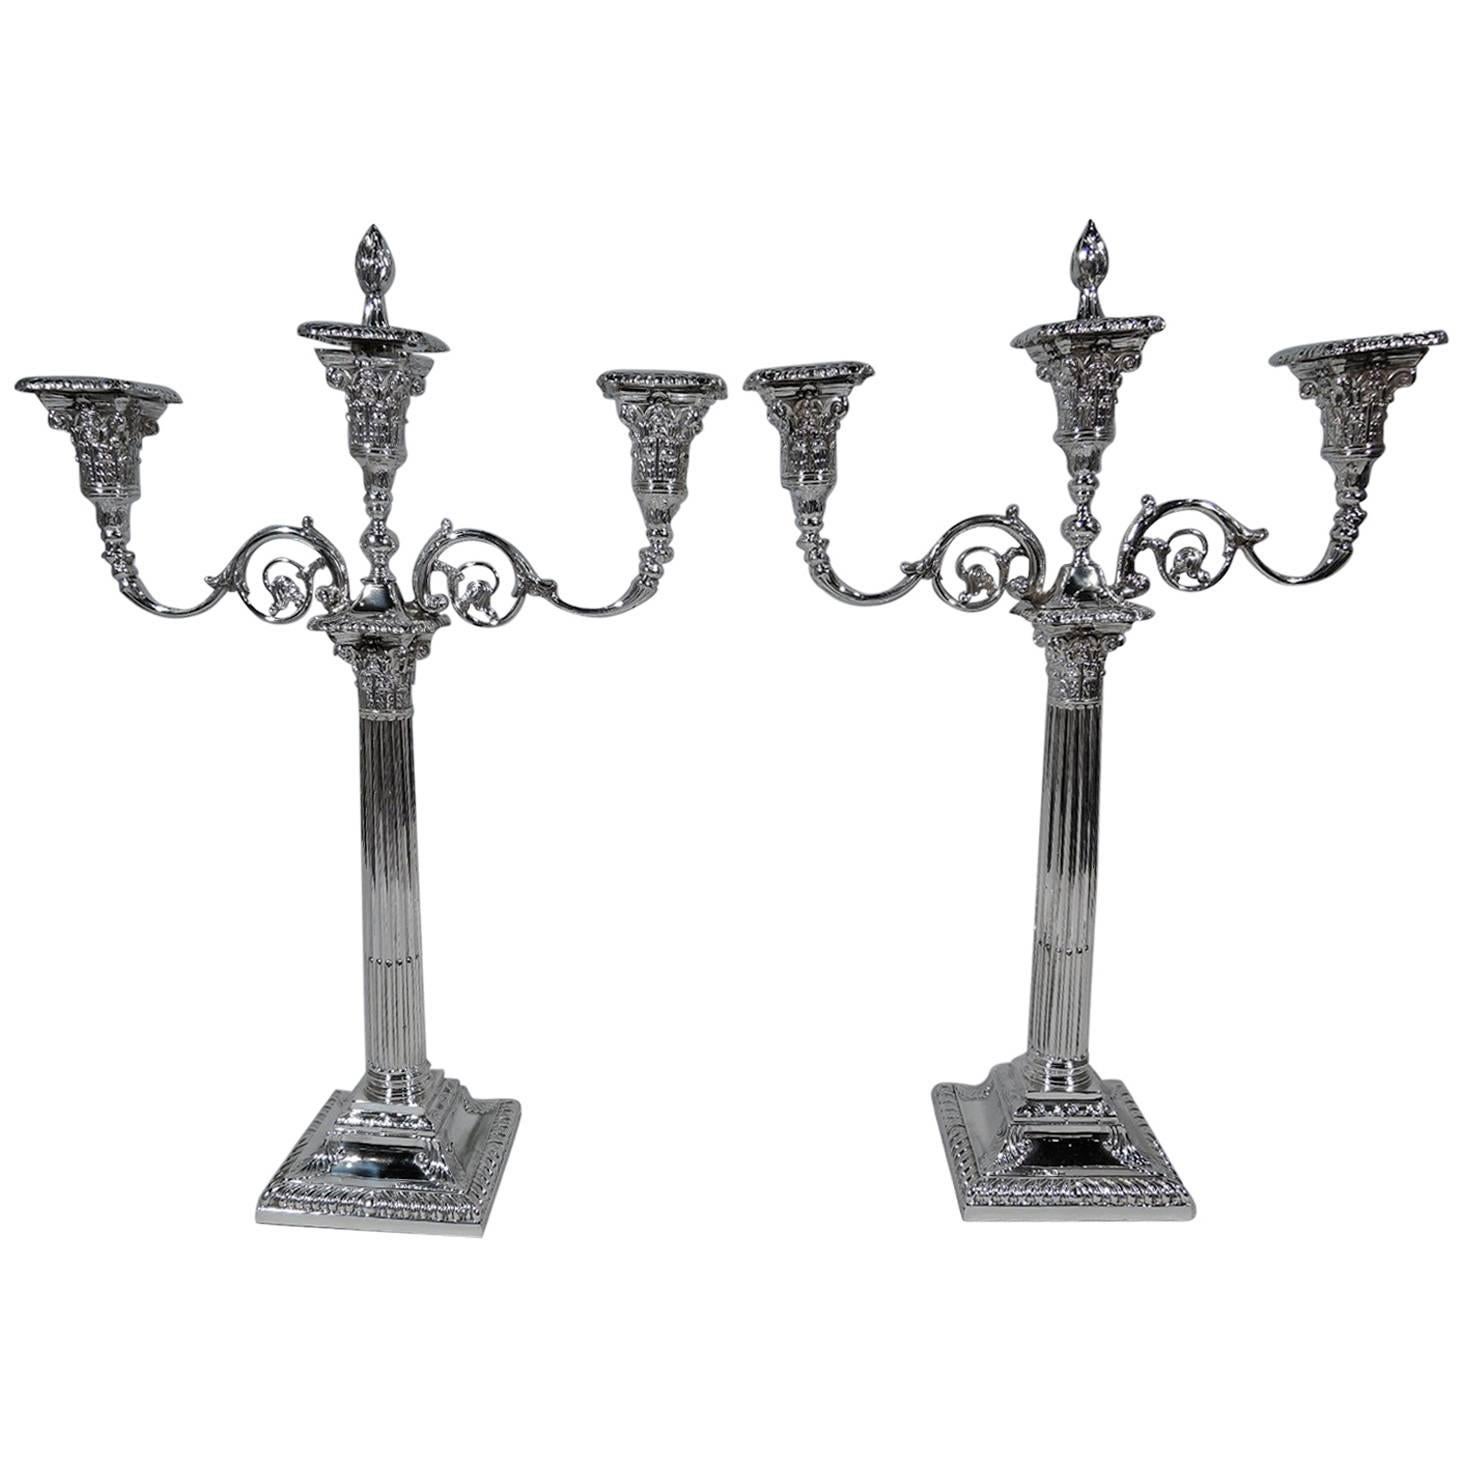 Pair of English Neoclassical Sterling Silver Three-Light Candelabra